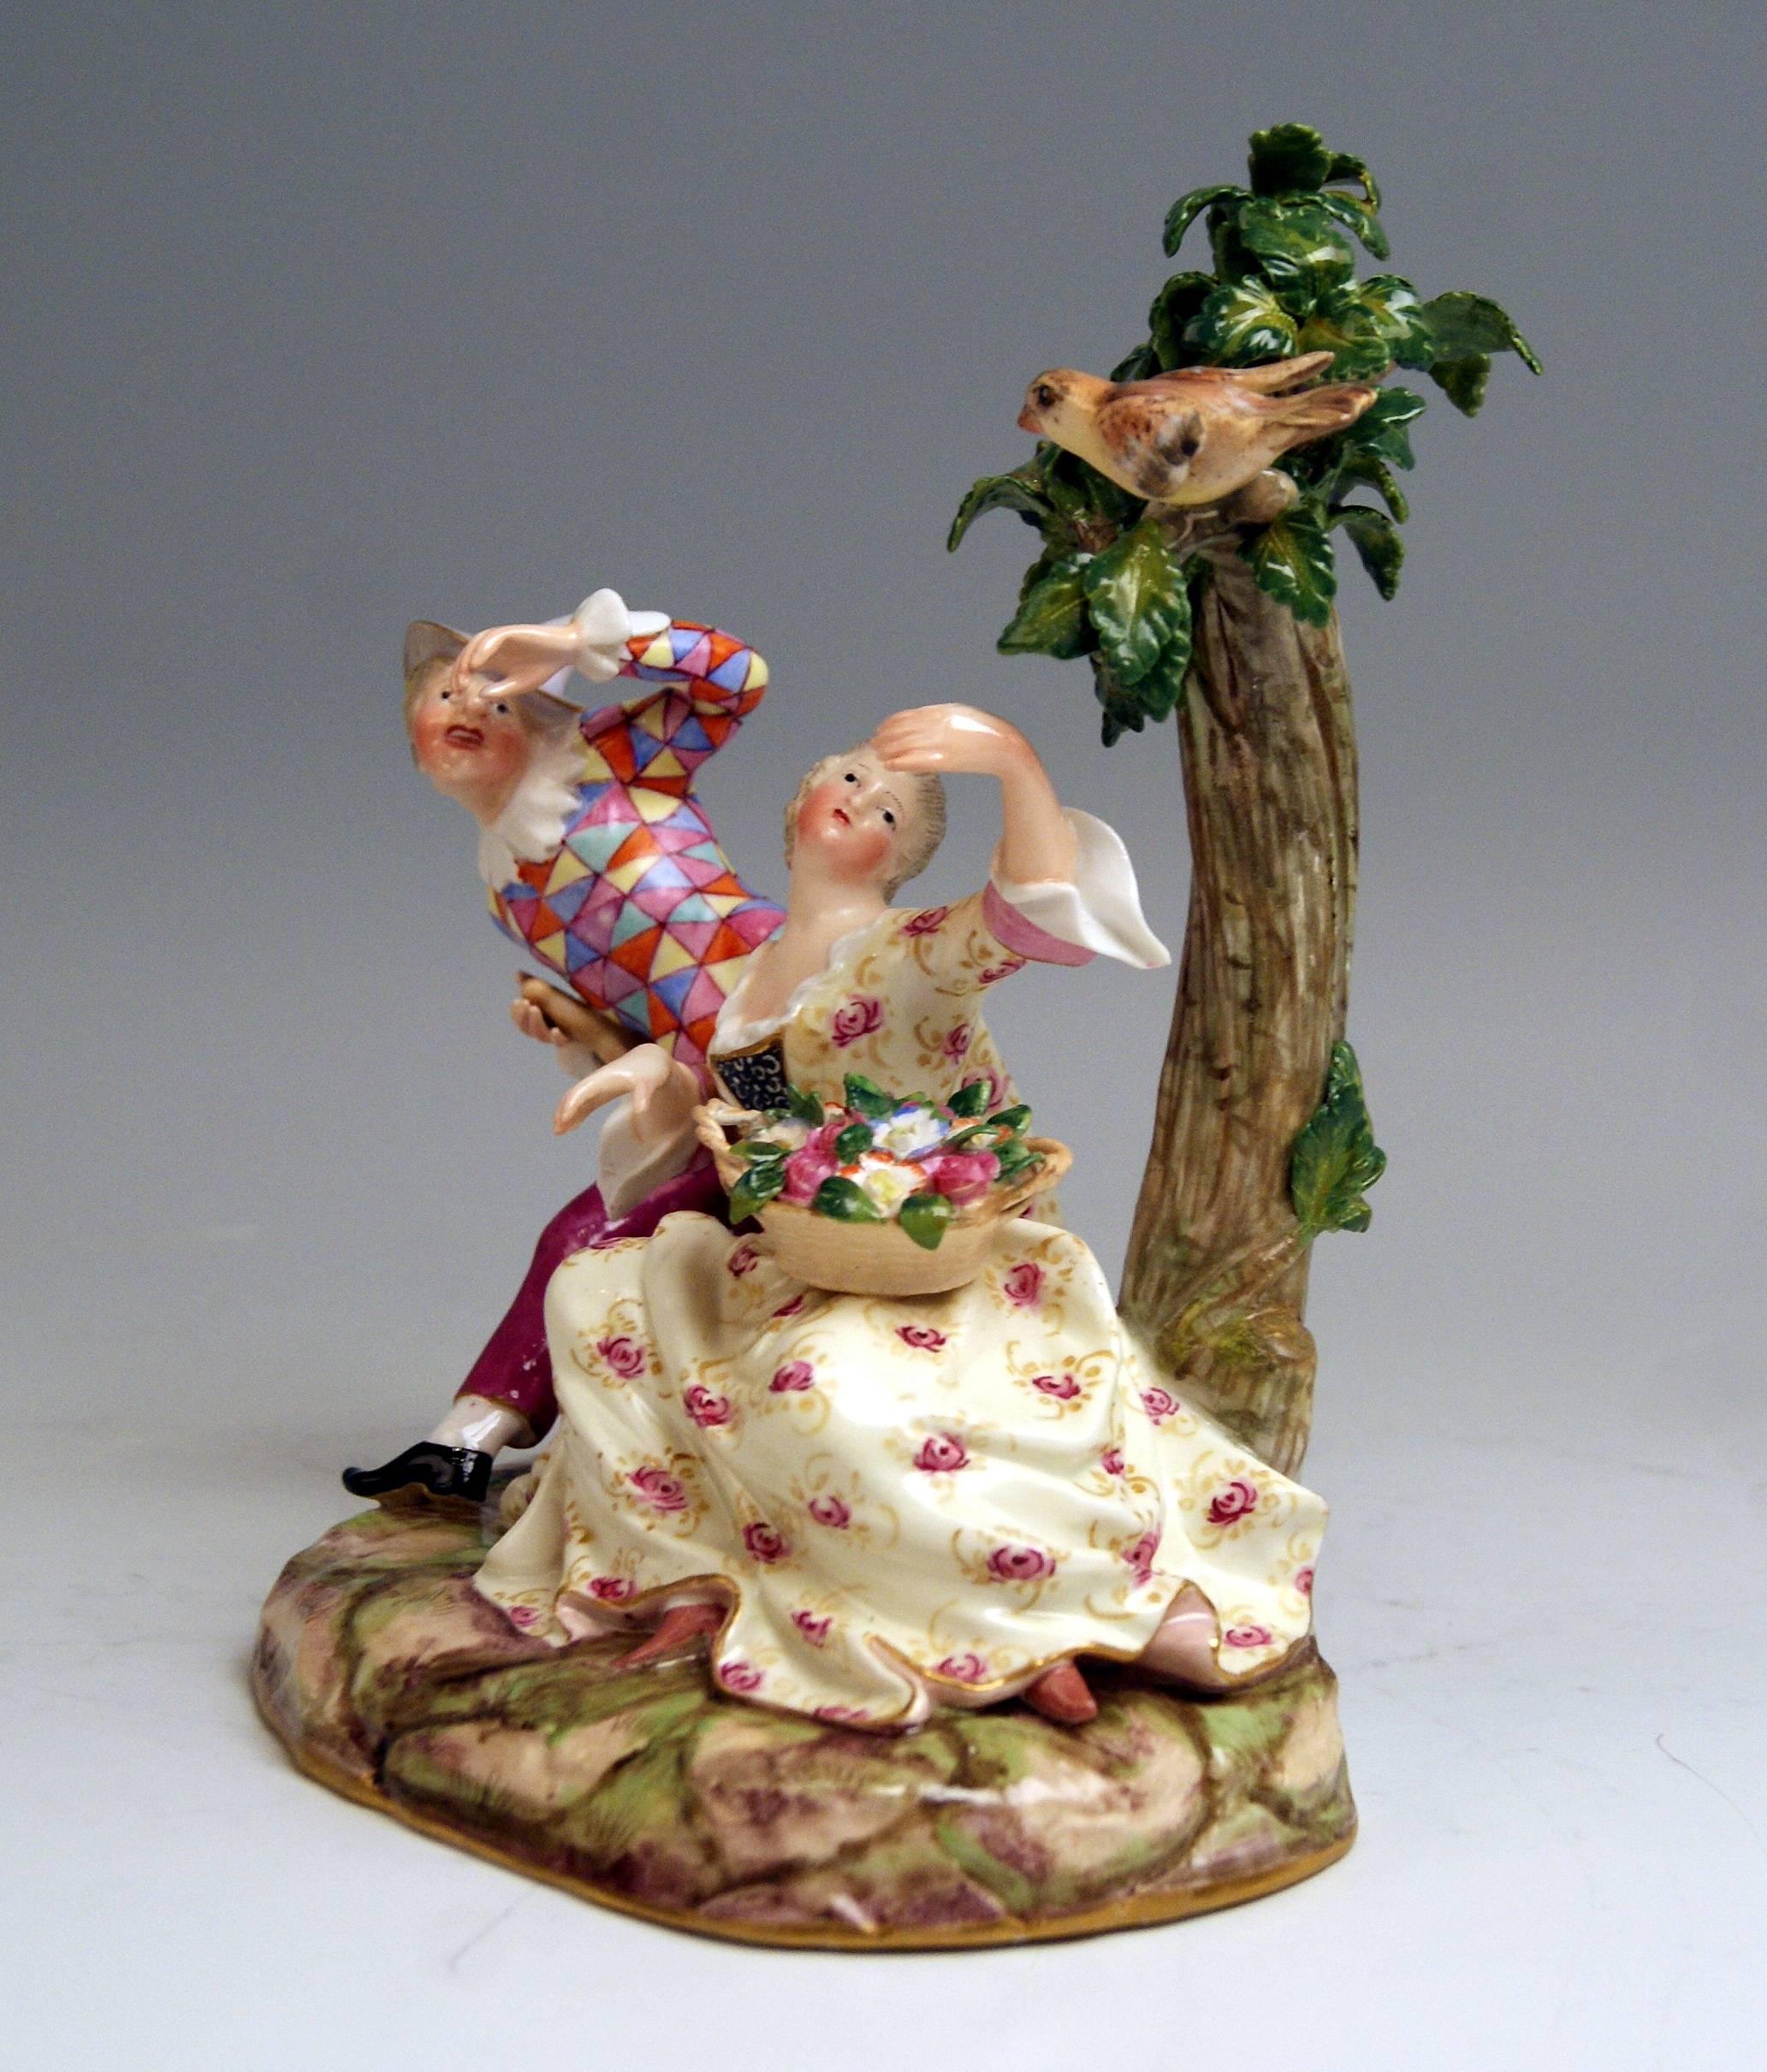 Meissen stunning figurine group: Harlequin and girl

Measures:
height 7.28 inches 
width 6.69 inches
depth 4.13 inches

Manufactory: Meissen
Hallmarked: Blue Meissen Sword Mark (glazed bottom)
First quality 
Dating: 19th century / made